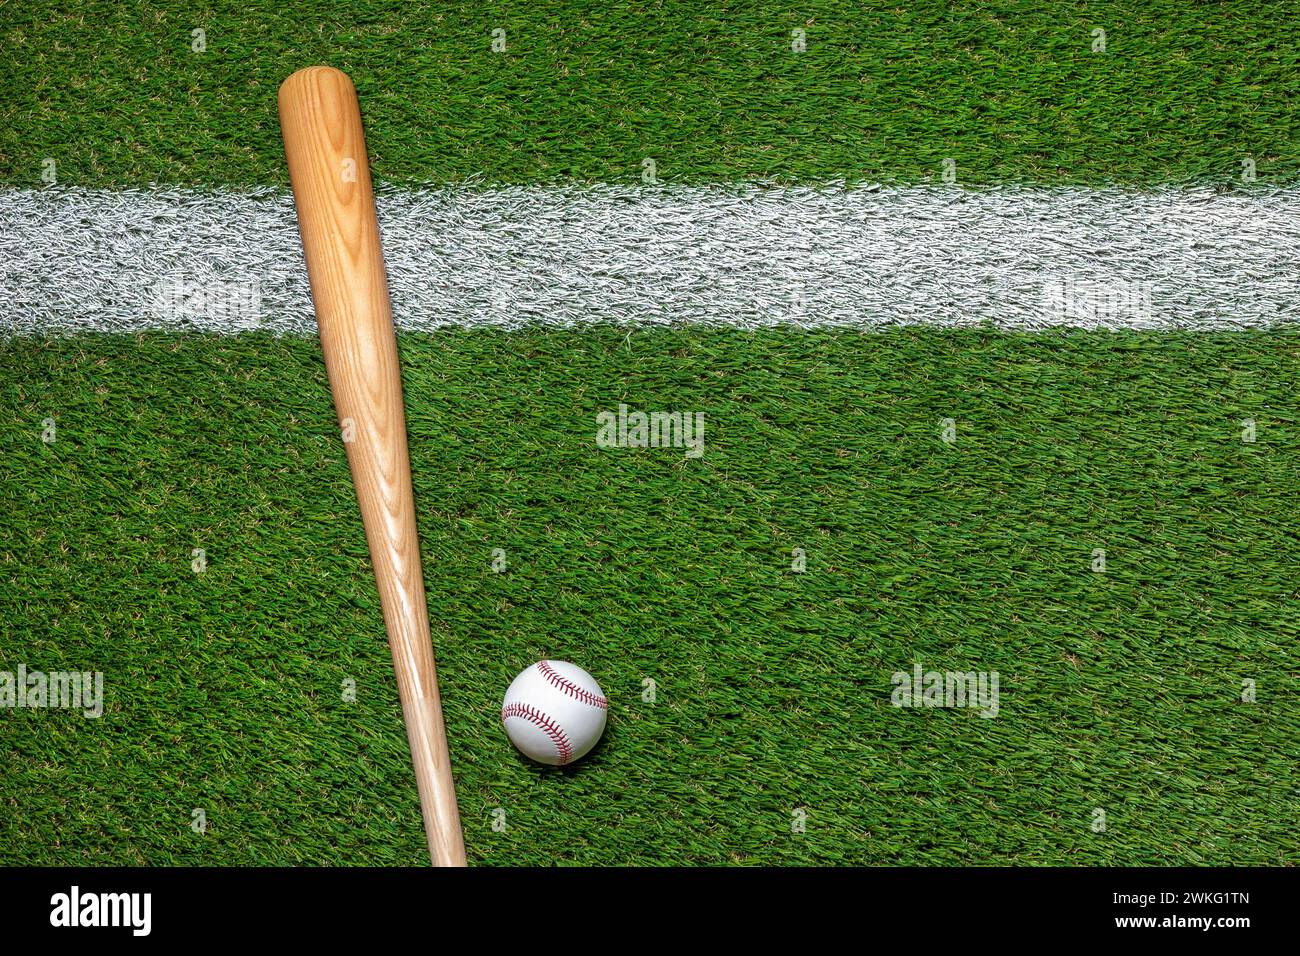 Baseball and wooden bat on grass field with white stripe overhead view Stock Photo